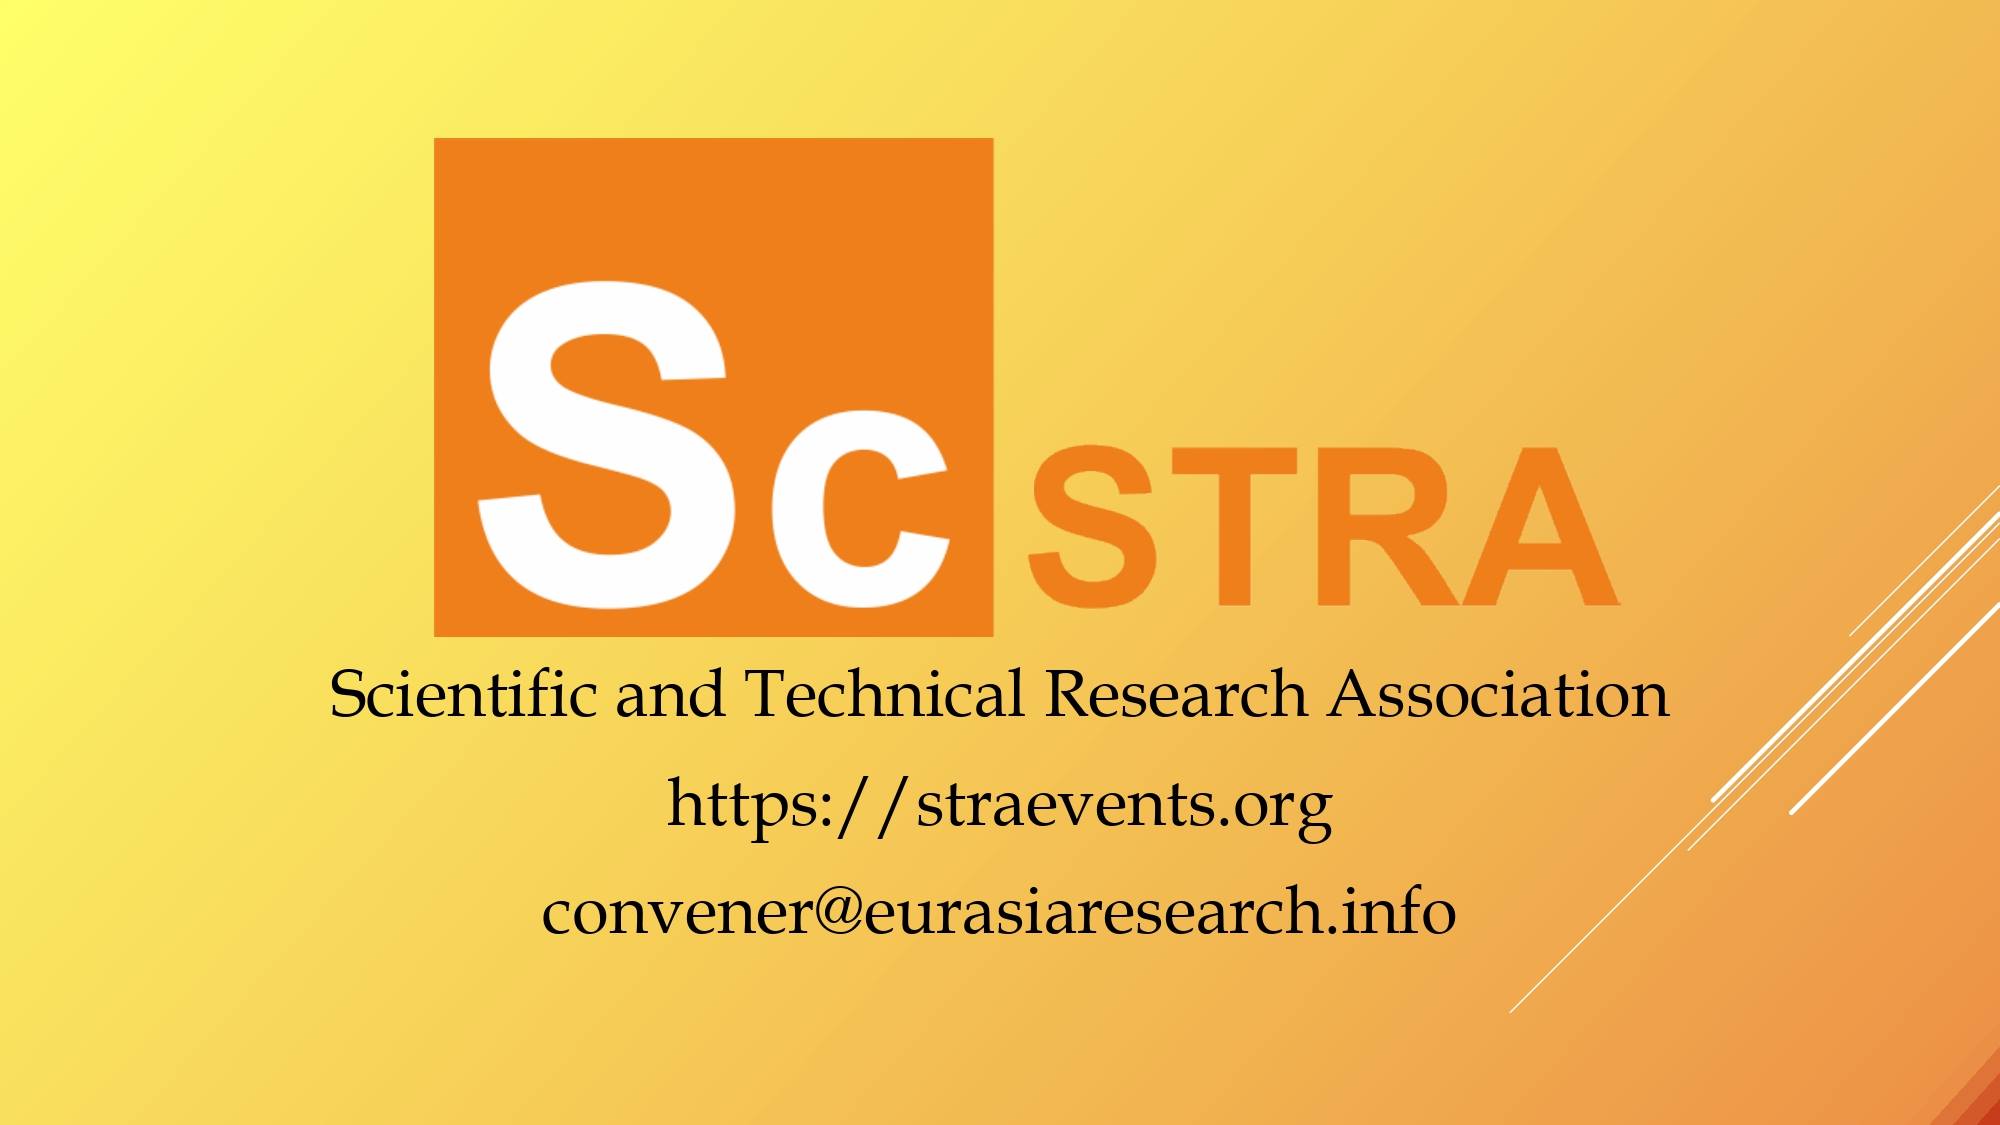 8th ICSTR London – International Conference on Science & Technology Research, 28-29 April 2022